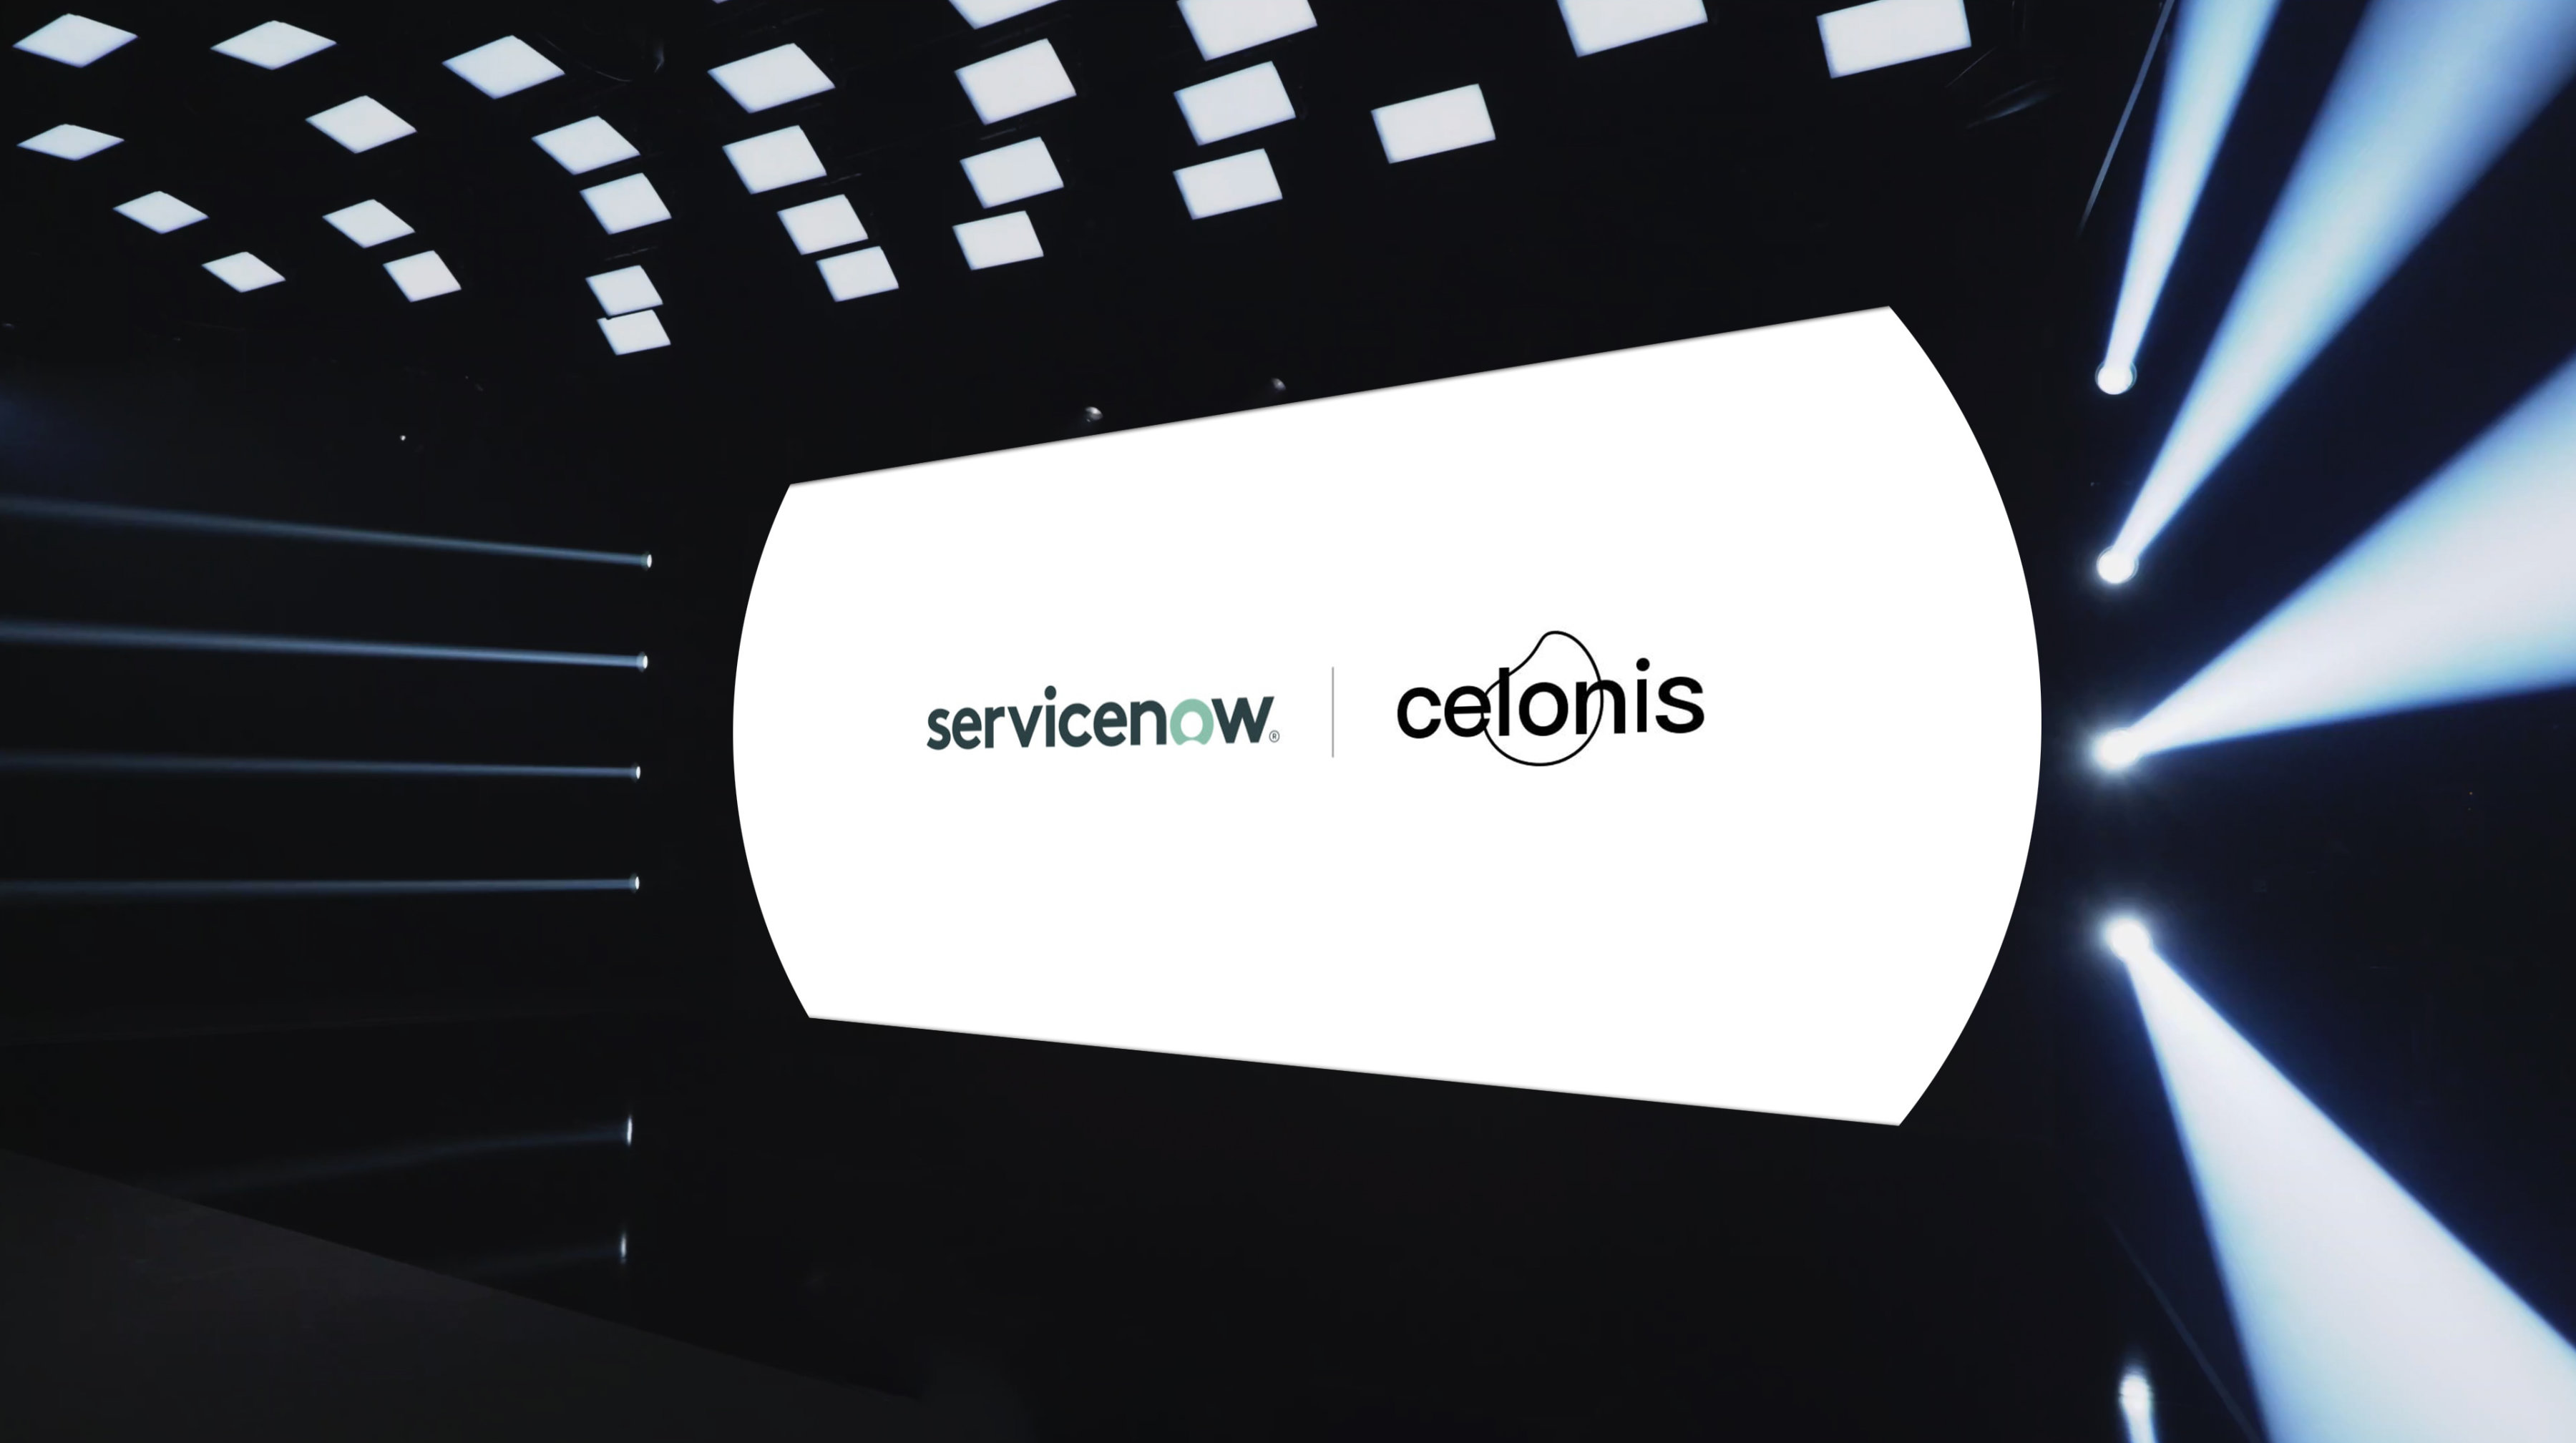 Celonis and ServiceNow: The Final Piece of the Digital Transformation Puzzle